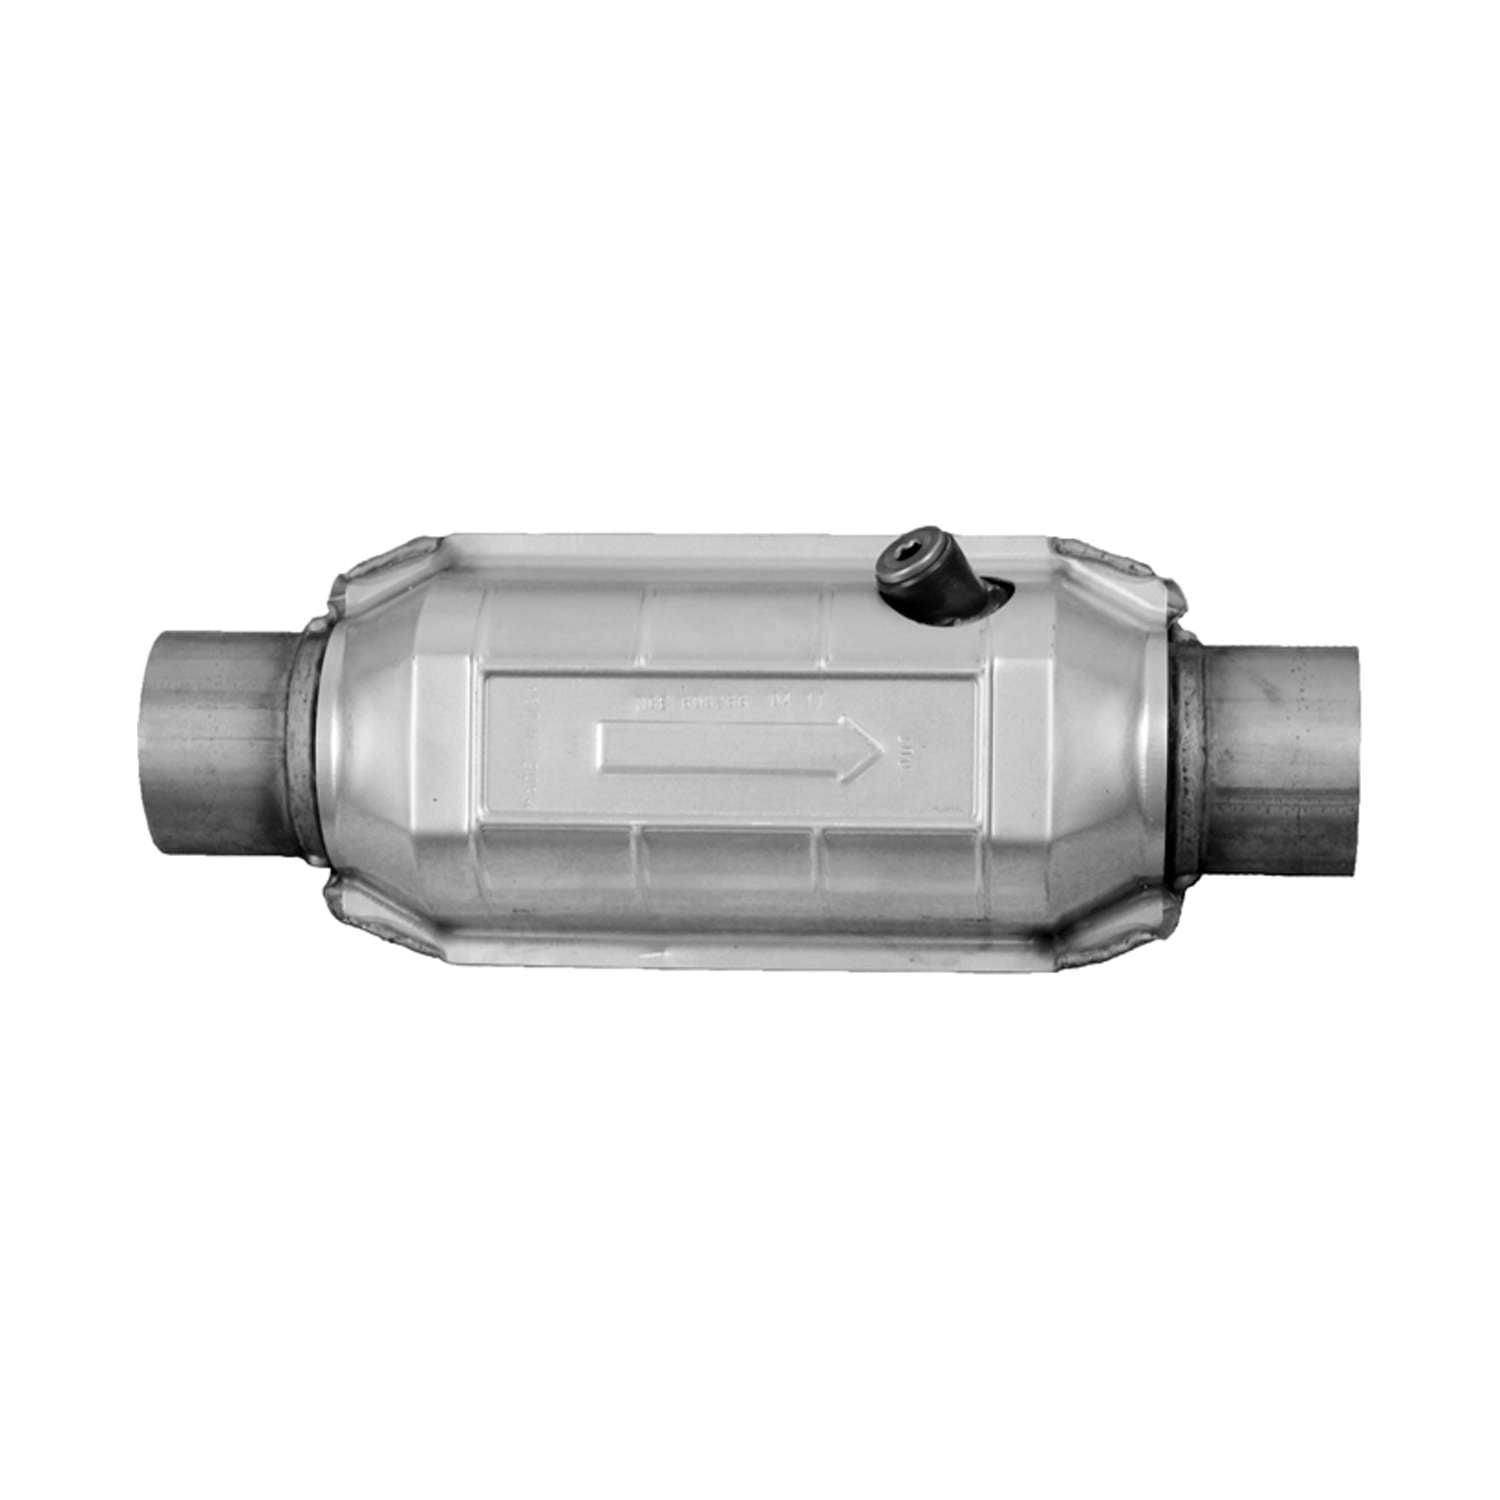 Direct Fit EPA Catalytic Converter Catco 4628 Federal 